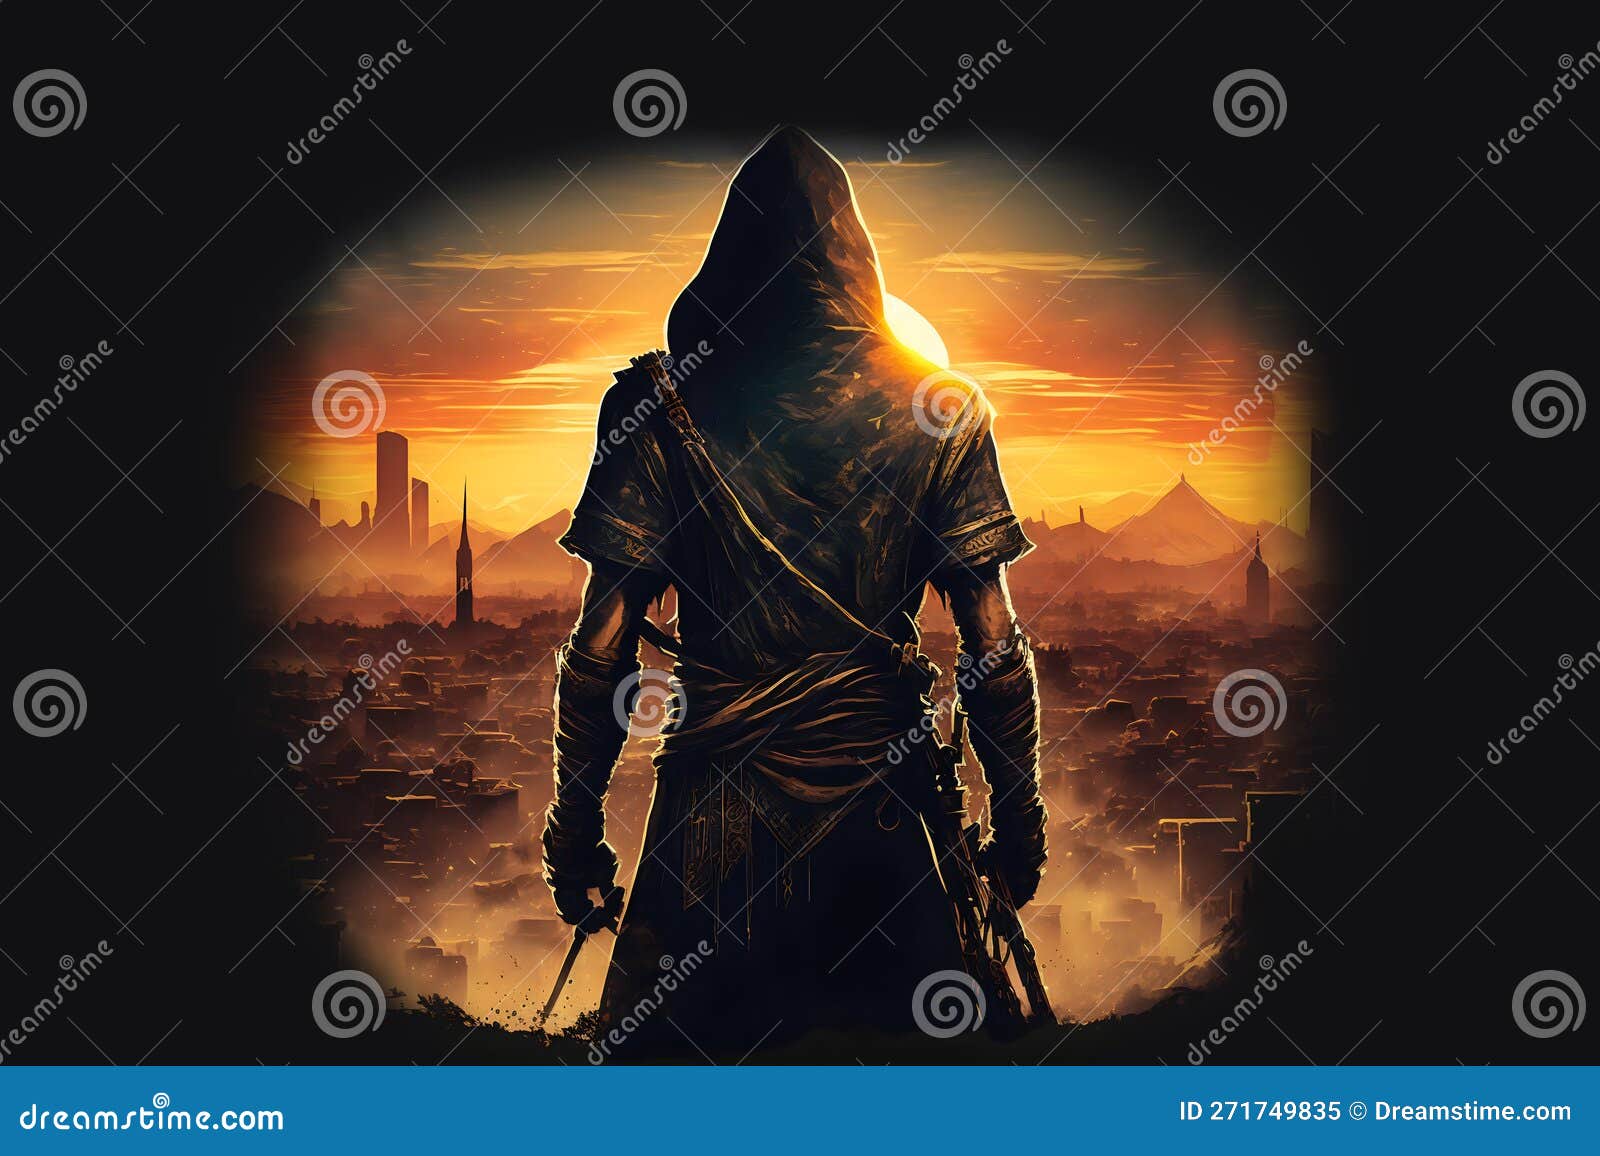 1,207 Assassins Creed Images, Stock Photos, 3D objects, & Vectors